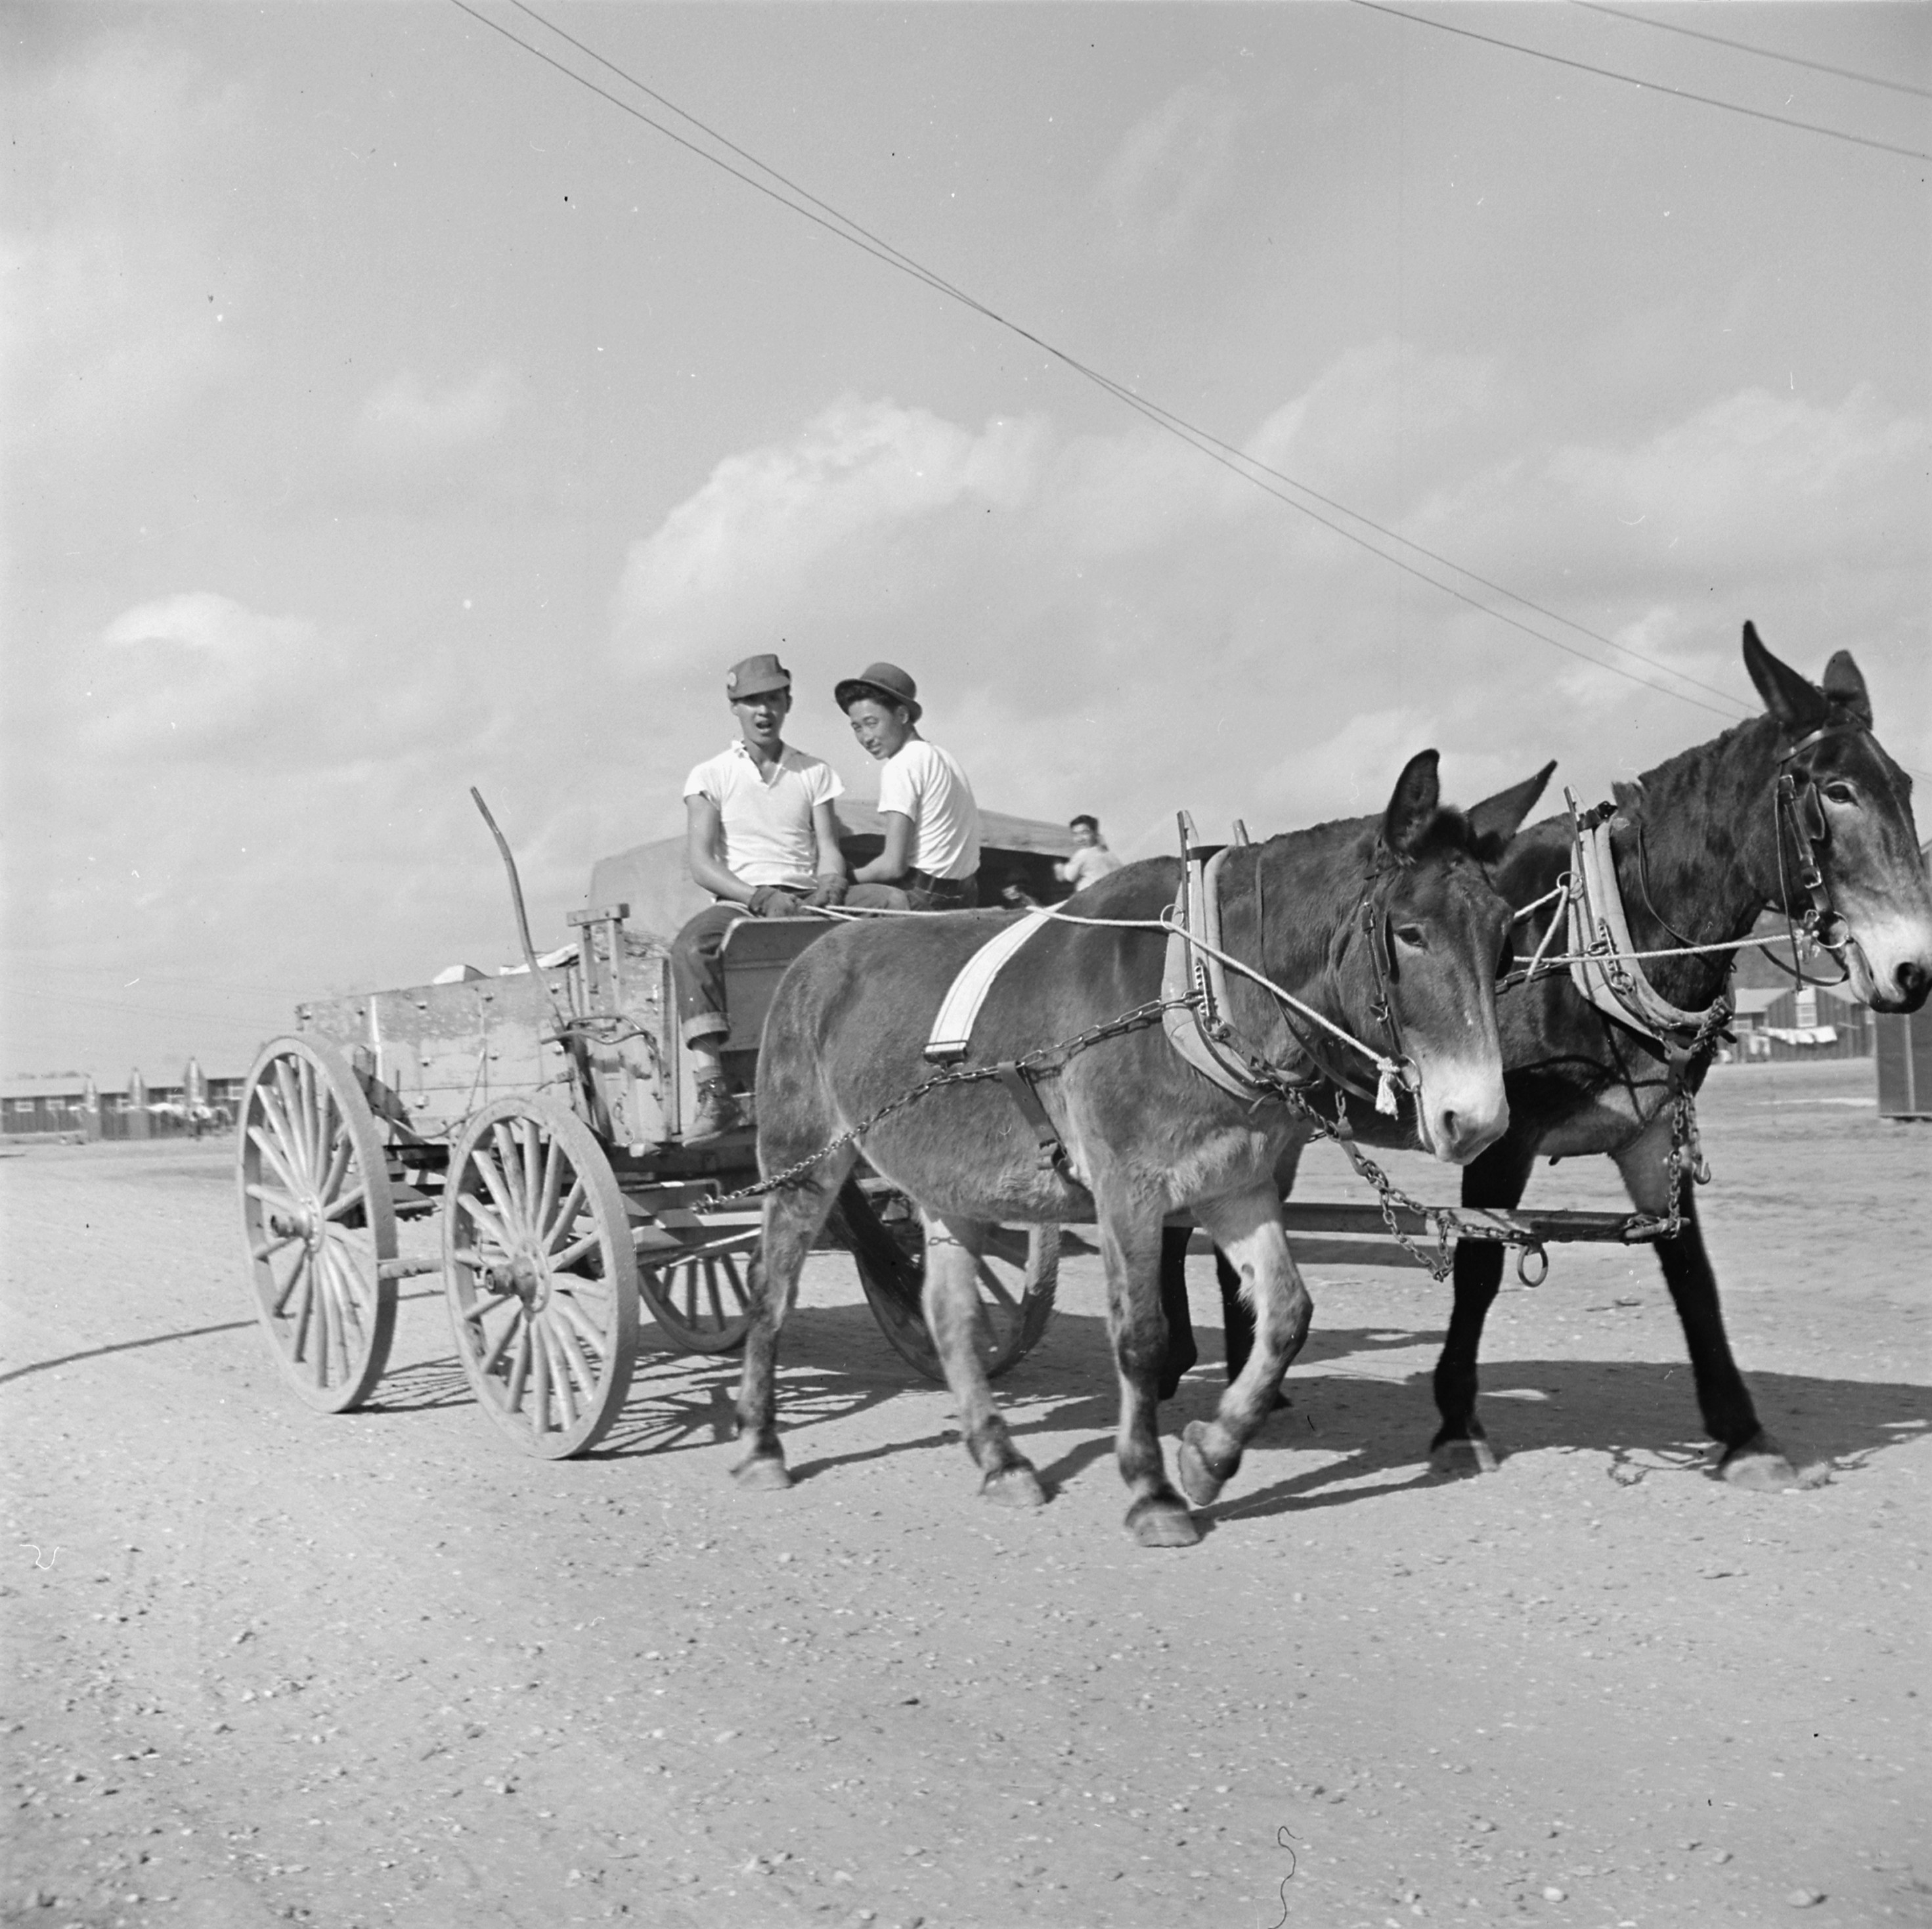 Mule wagon at Jerome War Relocation Center, Arkansas, United States, 18 Nov 1942, photo 1 of 6